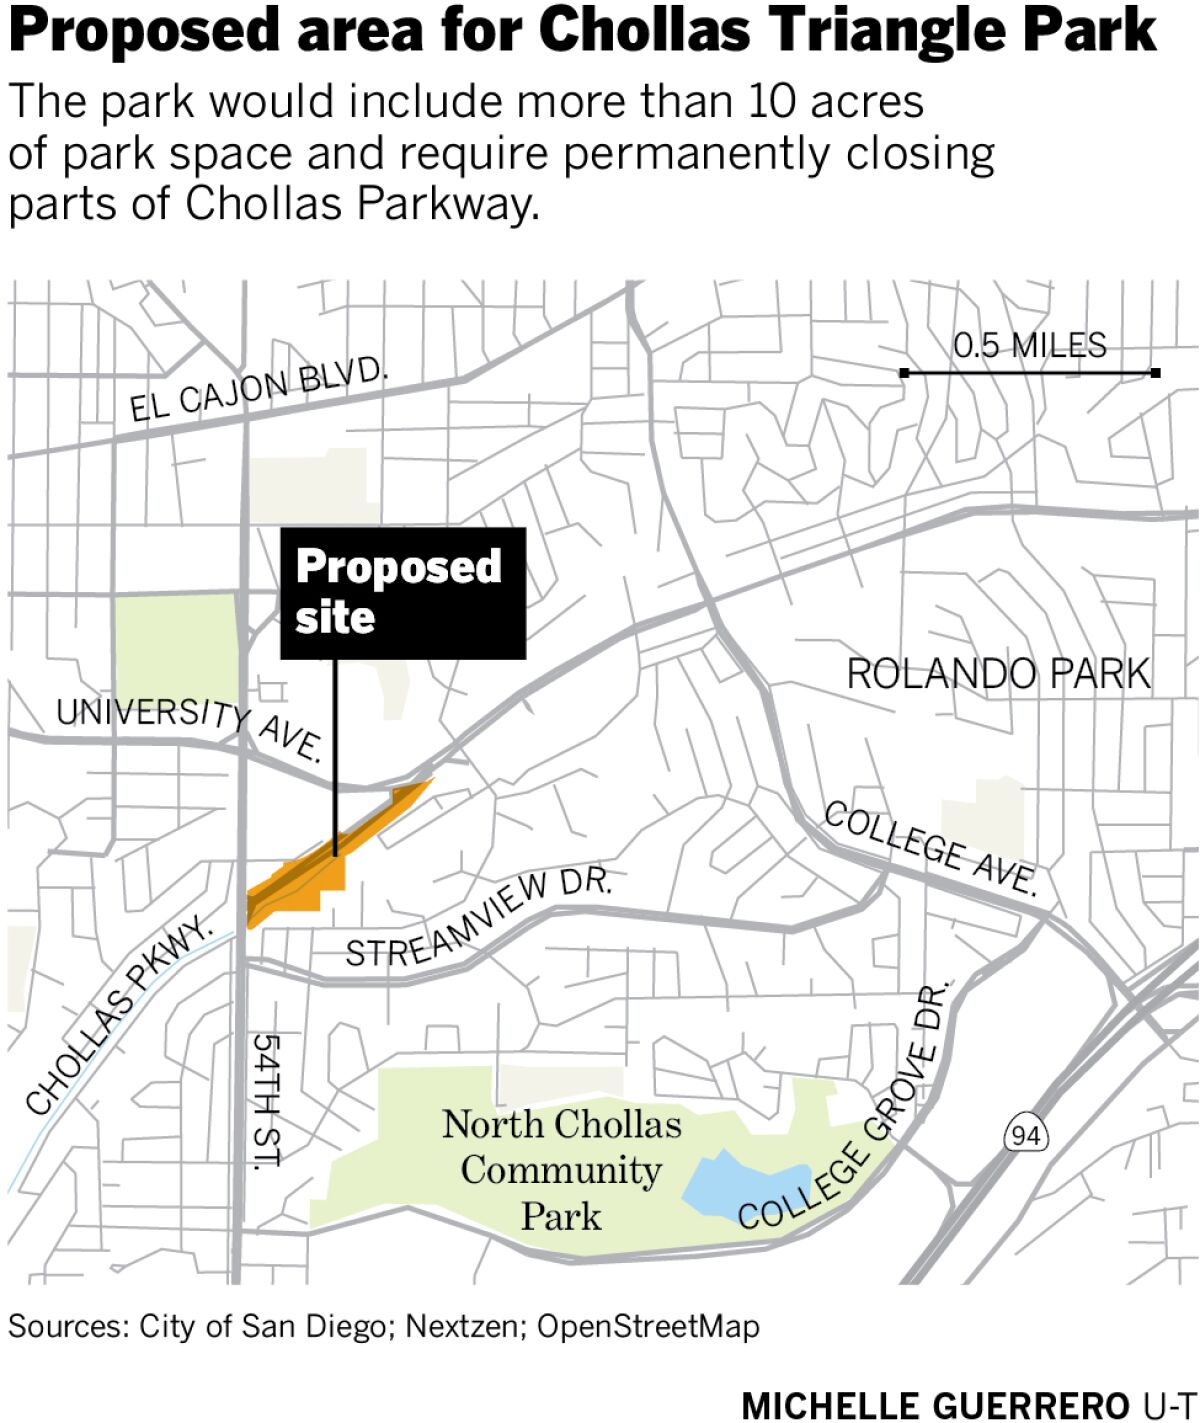 Proposed area for Chollas Triangle Park